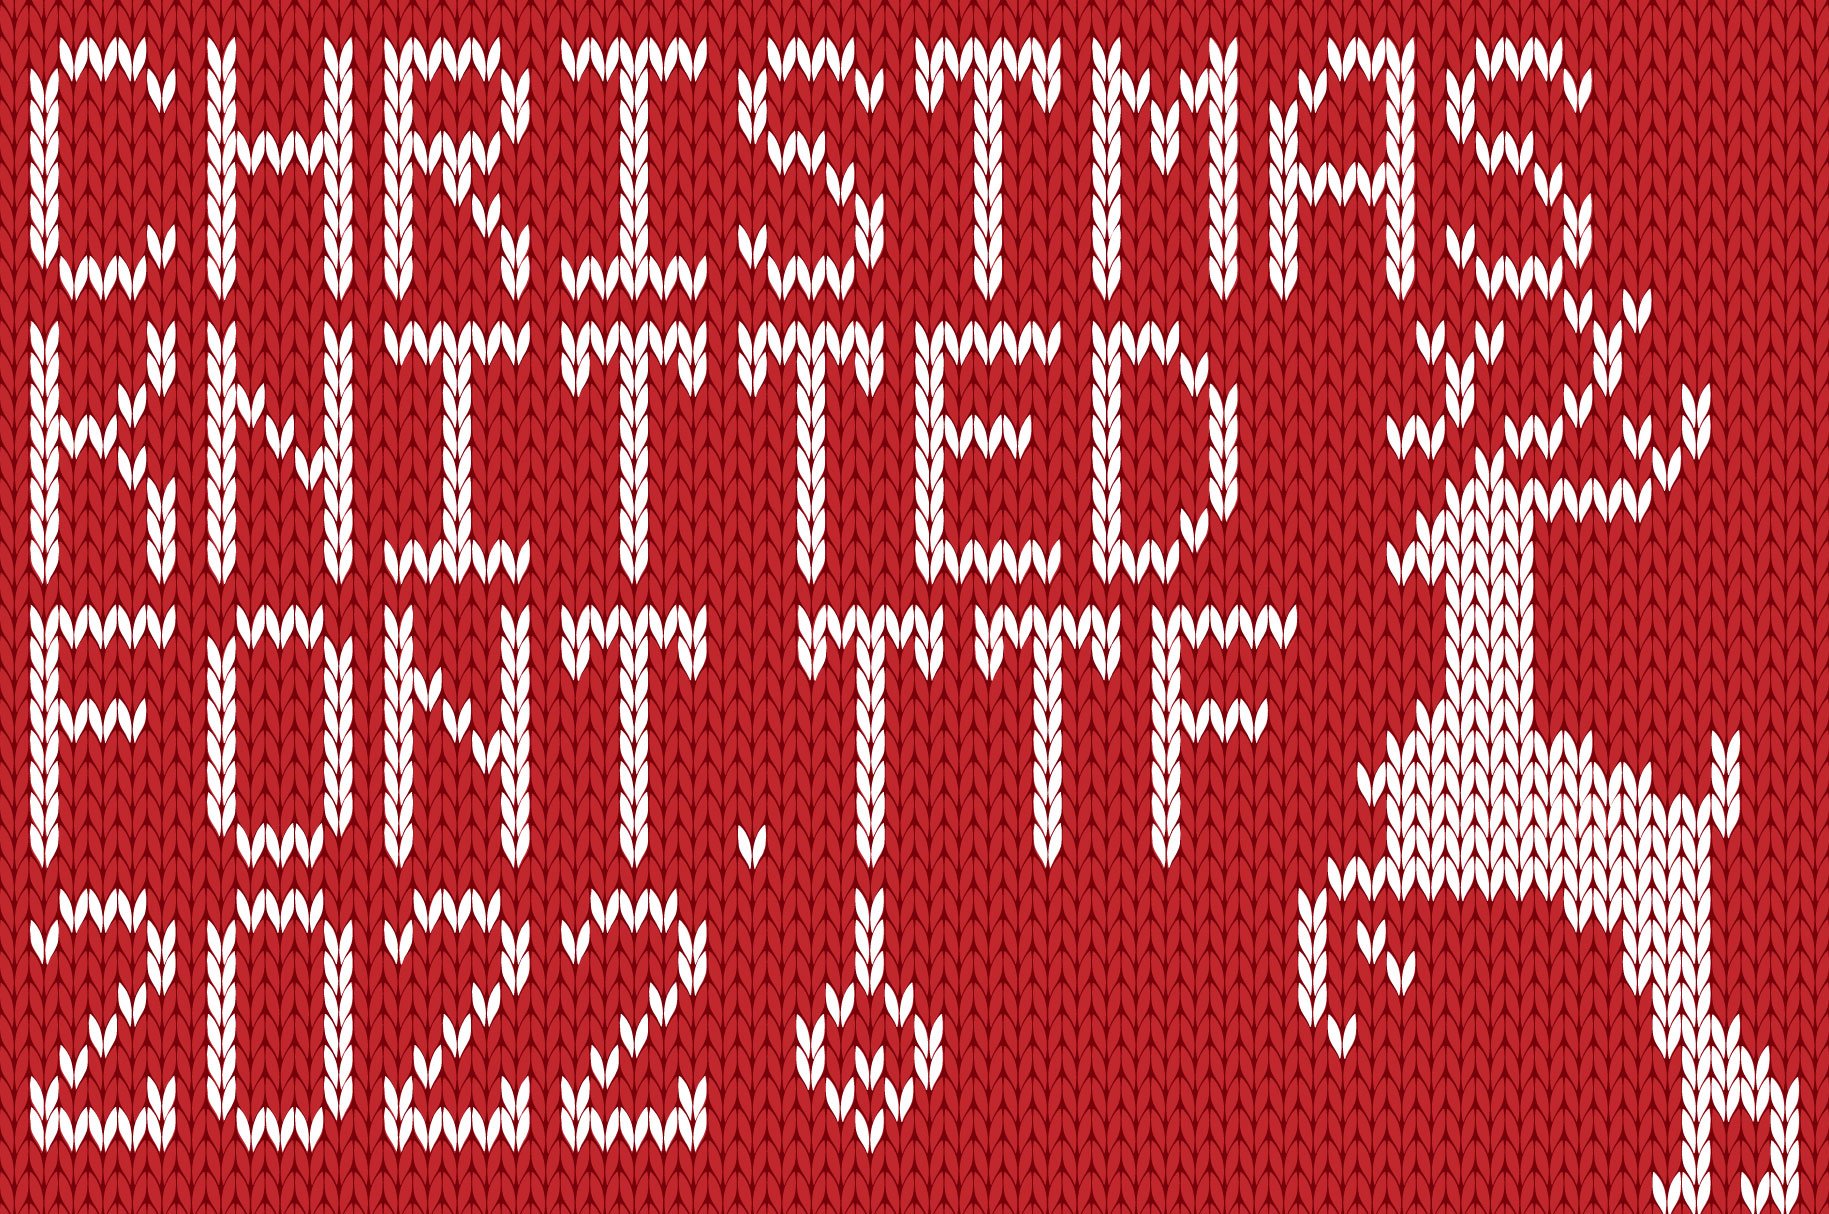 Сhristmas Knitted Font cover image.